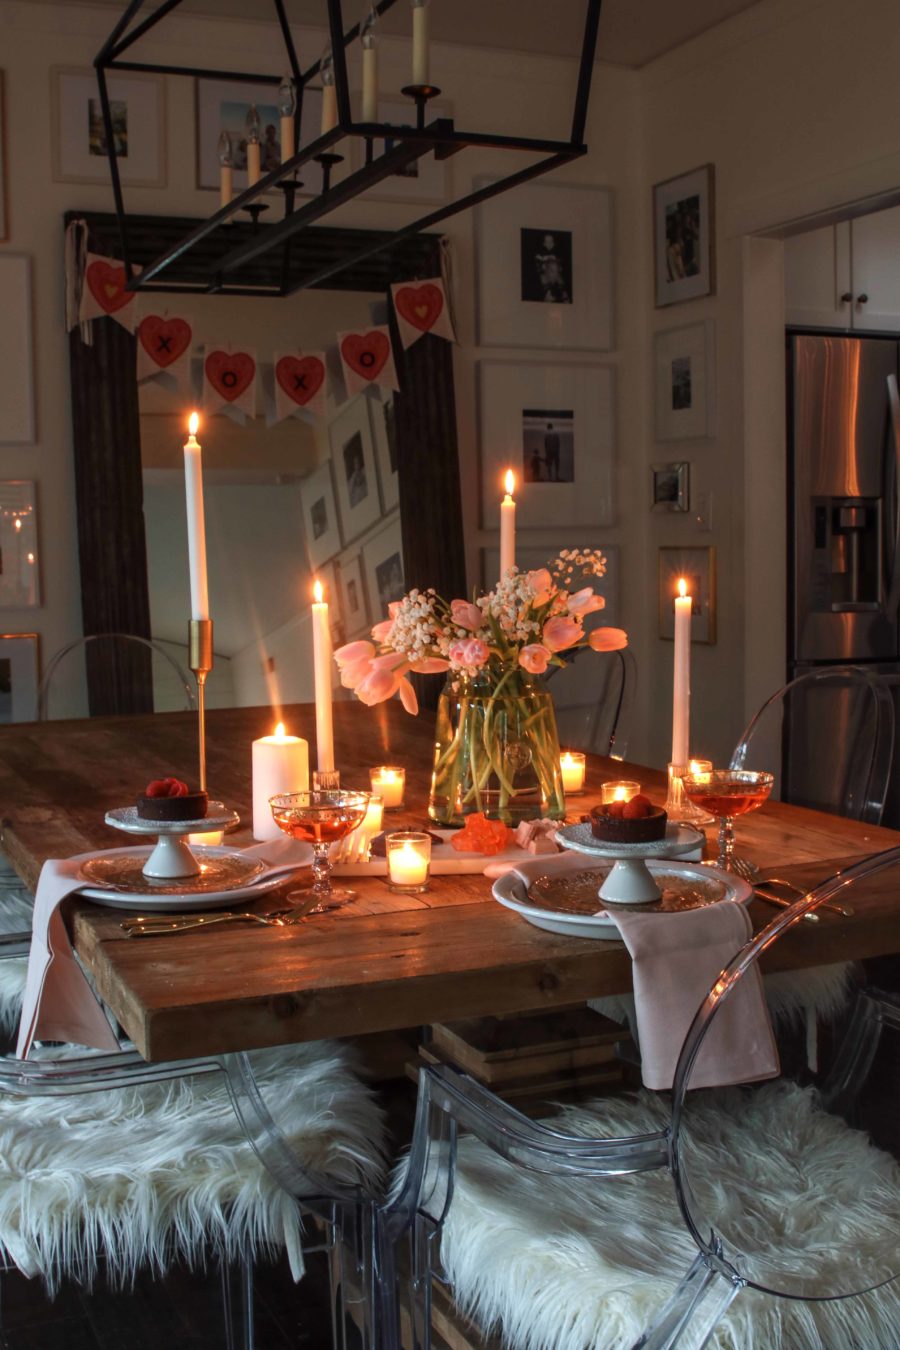 Valentines Day Dining Room Table Decor - Mommy Blogs